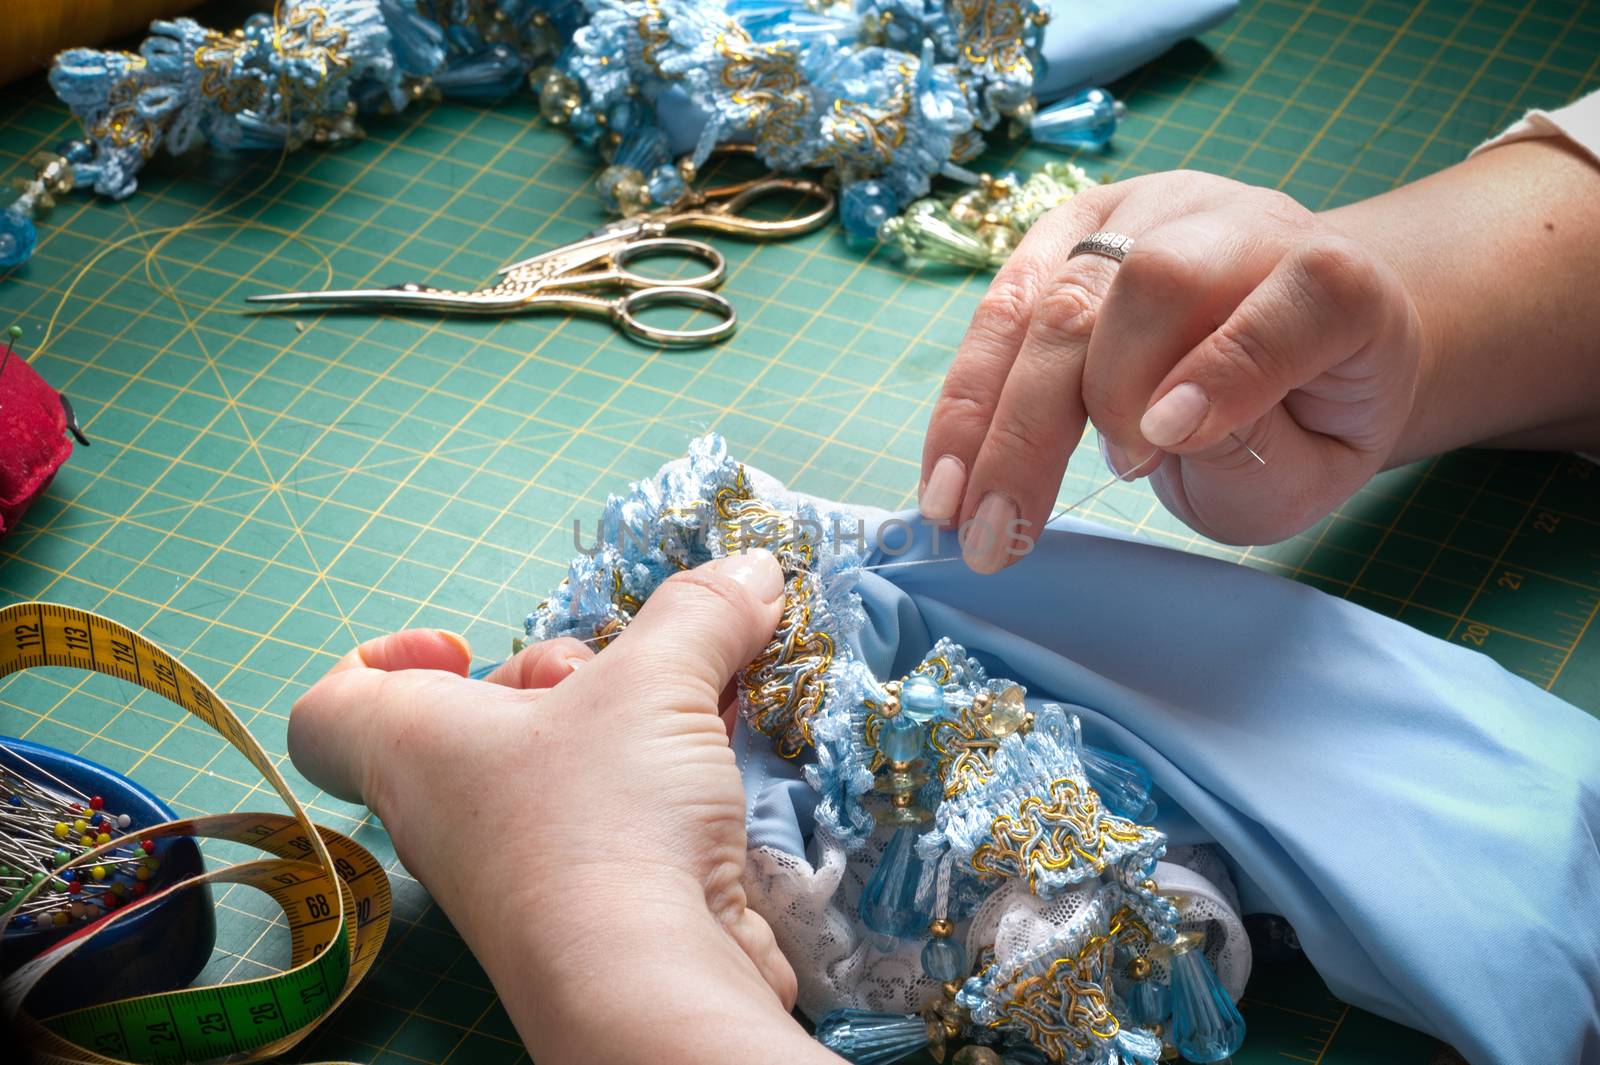 A woman sews a decorative element to clothes with needle by Garry518